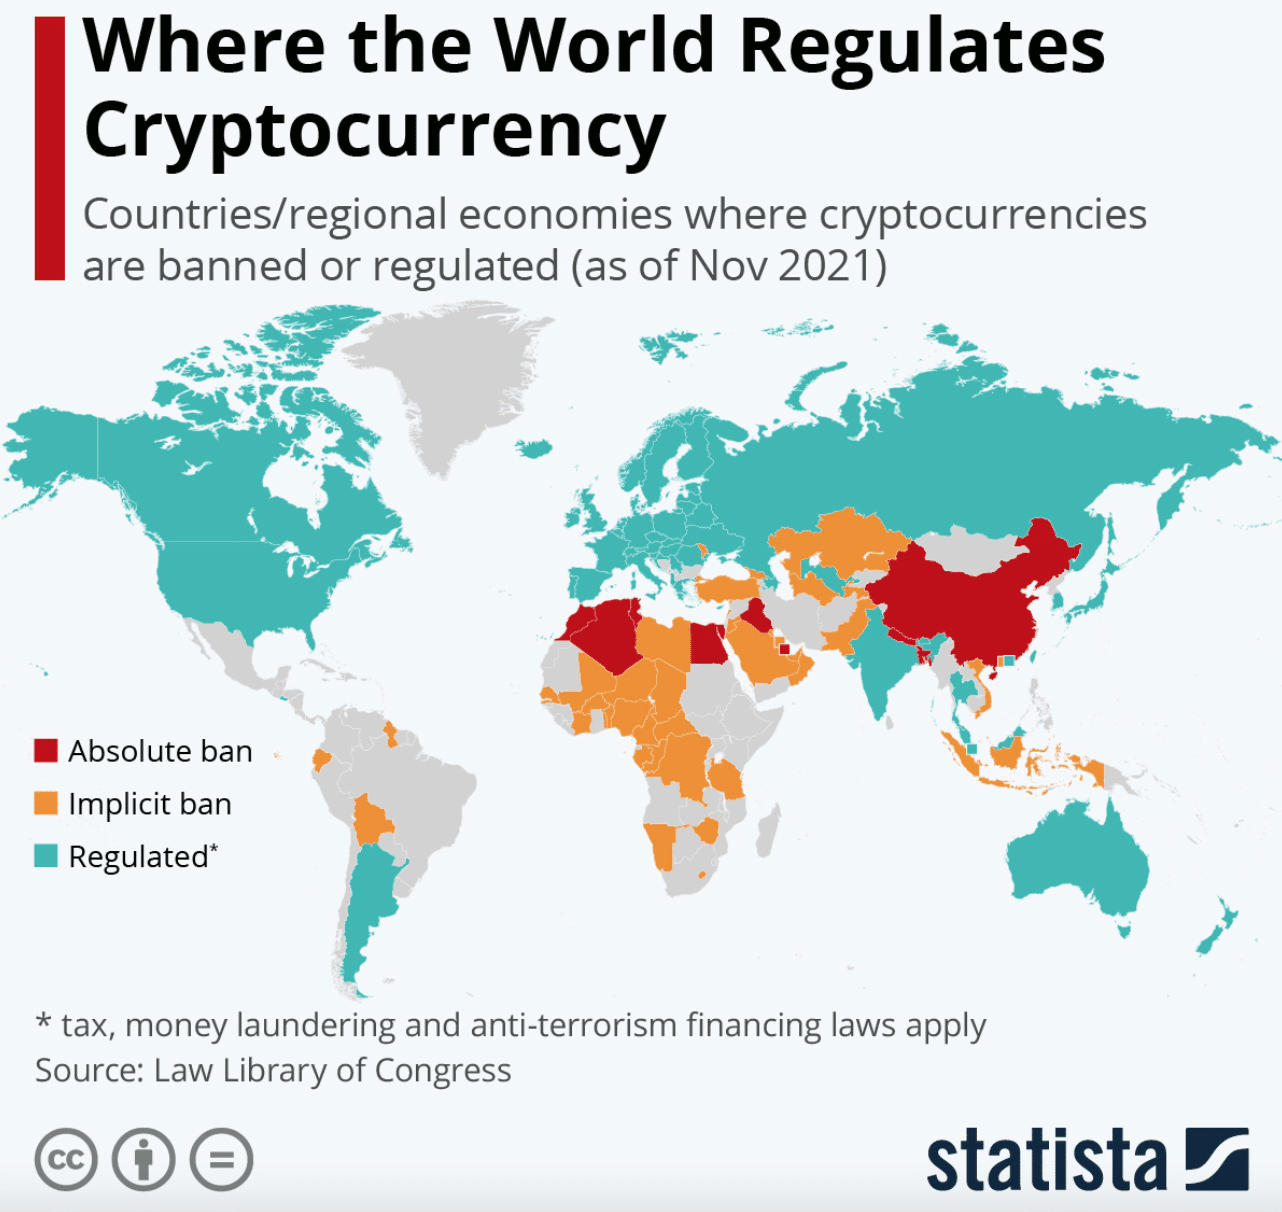 Countries where cryptocurrencies are banned or regulated